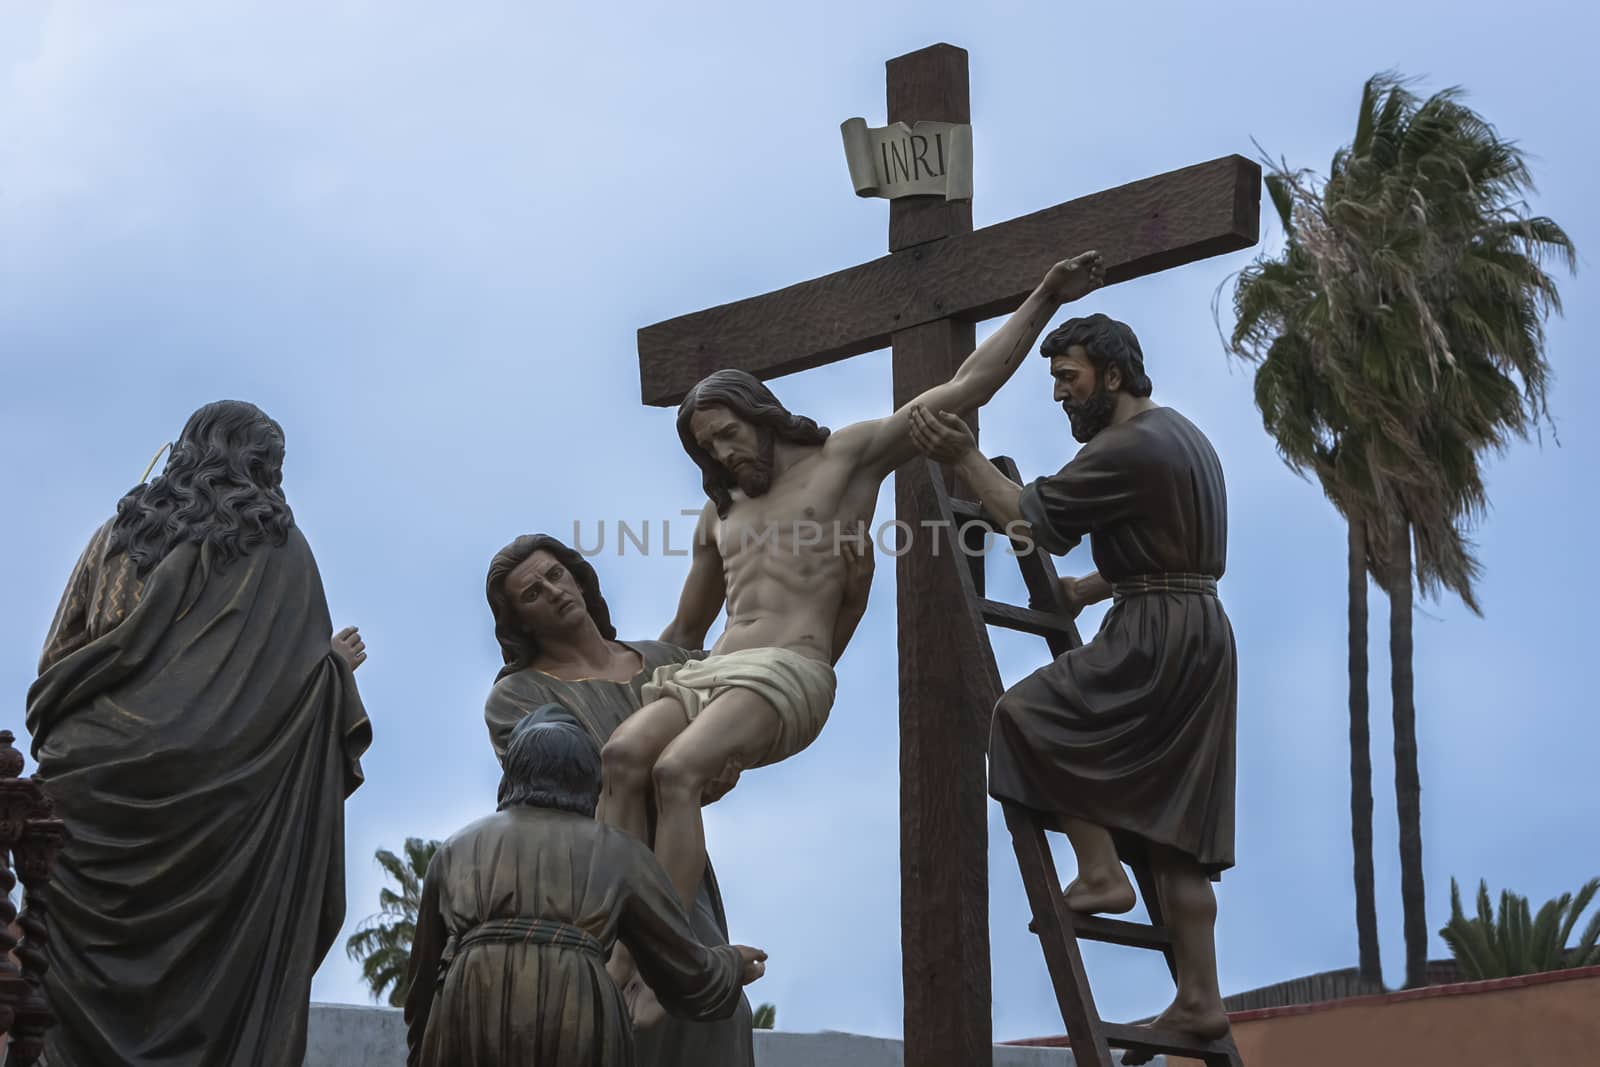 Linares, Jaen province, SPAIN -  April 6, 2012: Brotherhood of the Holy Christ of the descent, work of the Spanish sculptor Victor de los Rios, Linares, Jaen province, Andalusia, Spain